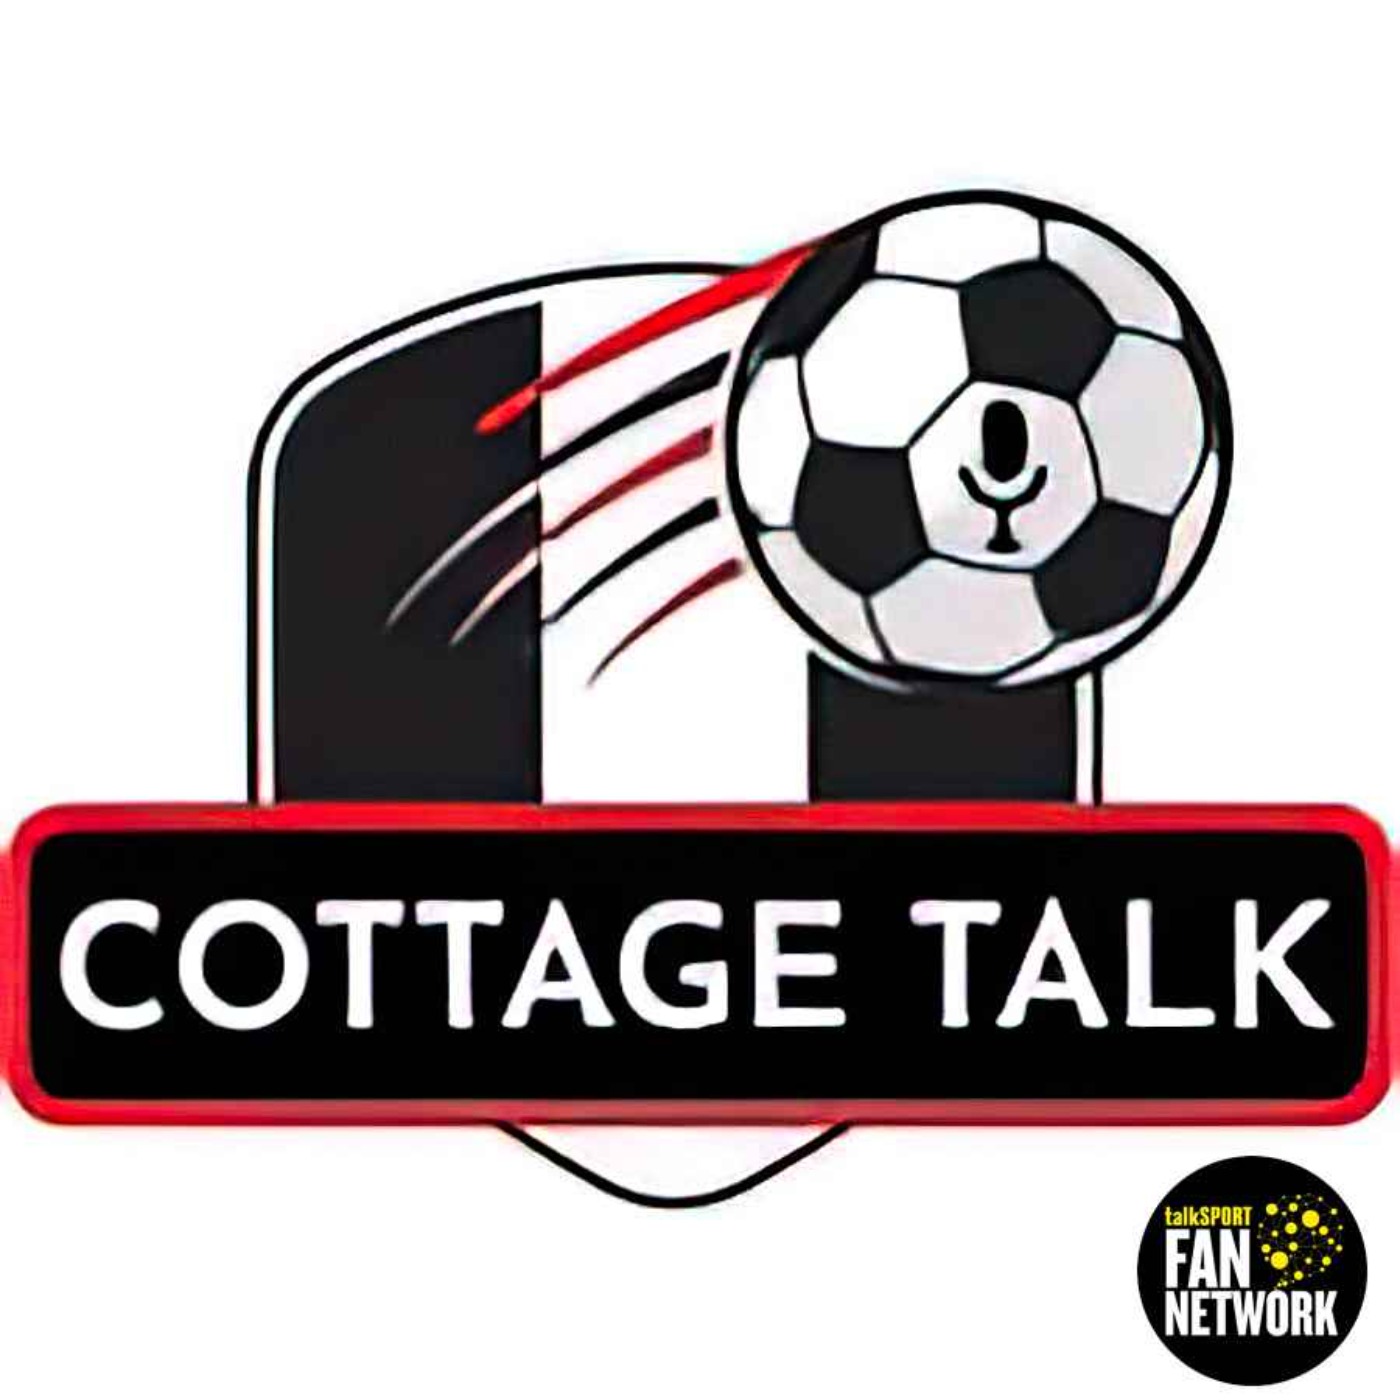 Cottage Talk Post Match Show: Fulham's Missed Opprtunity Against Wolves